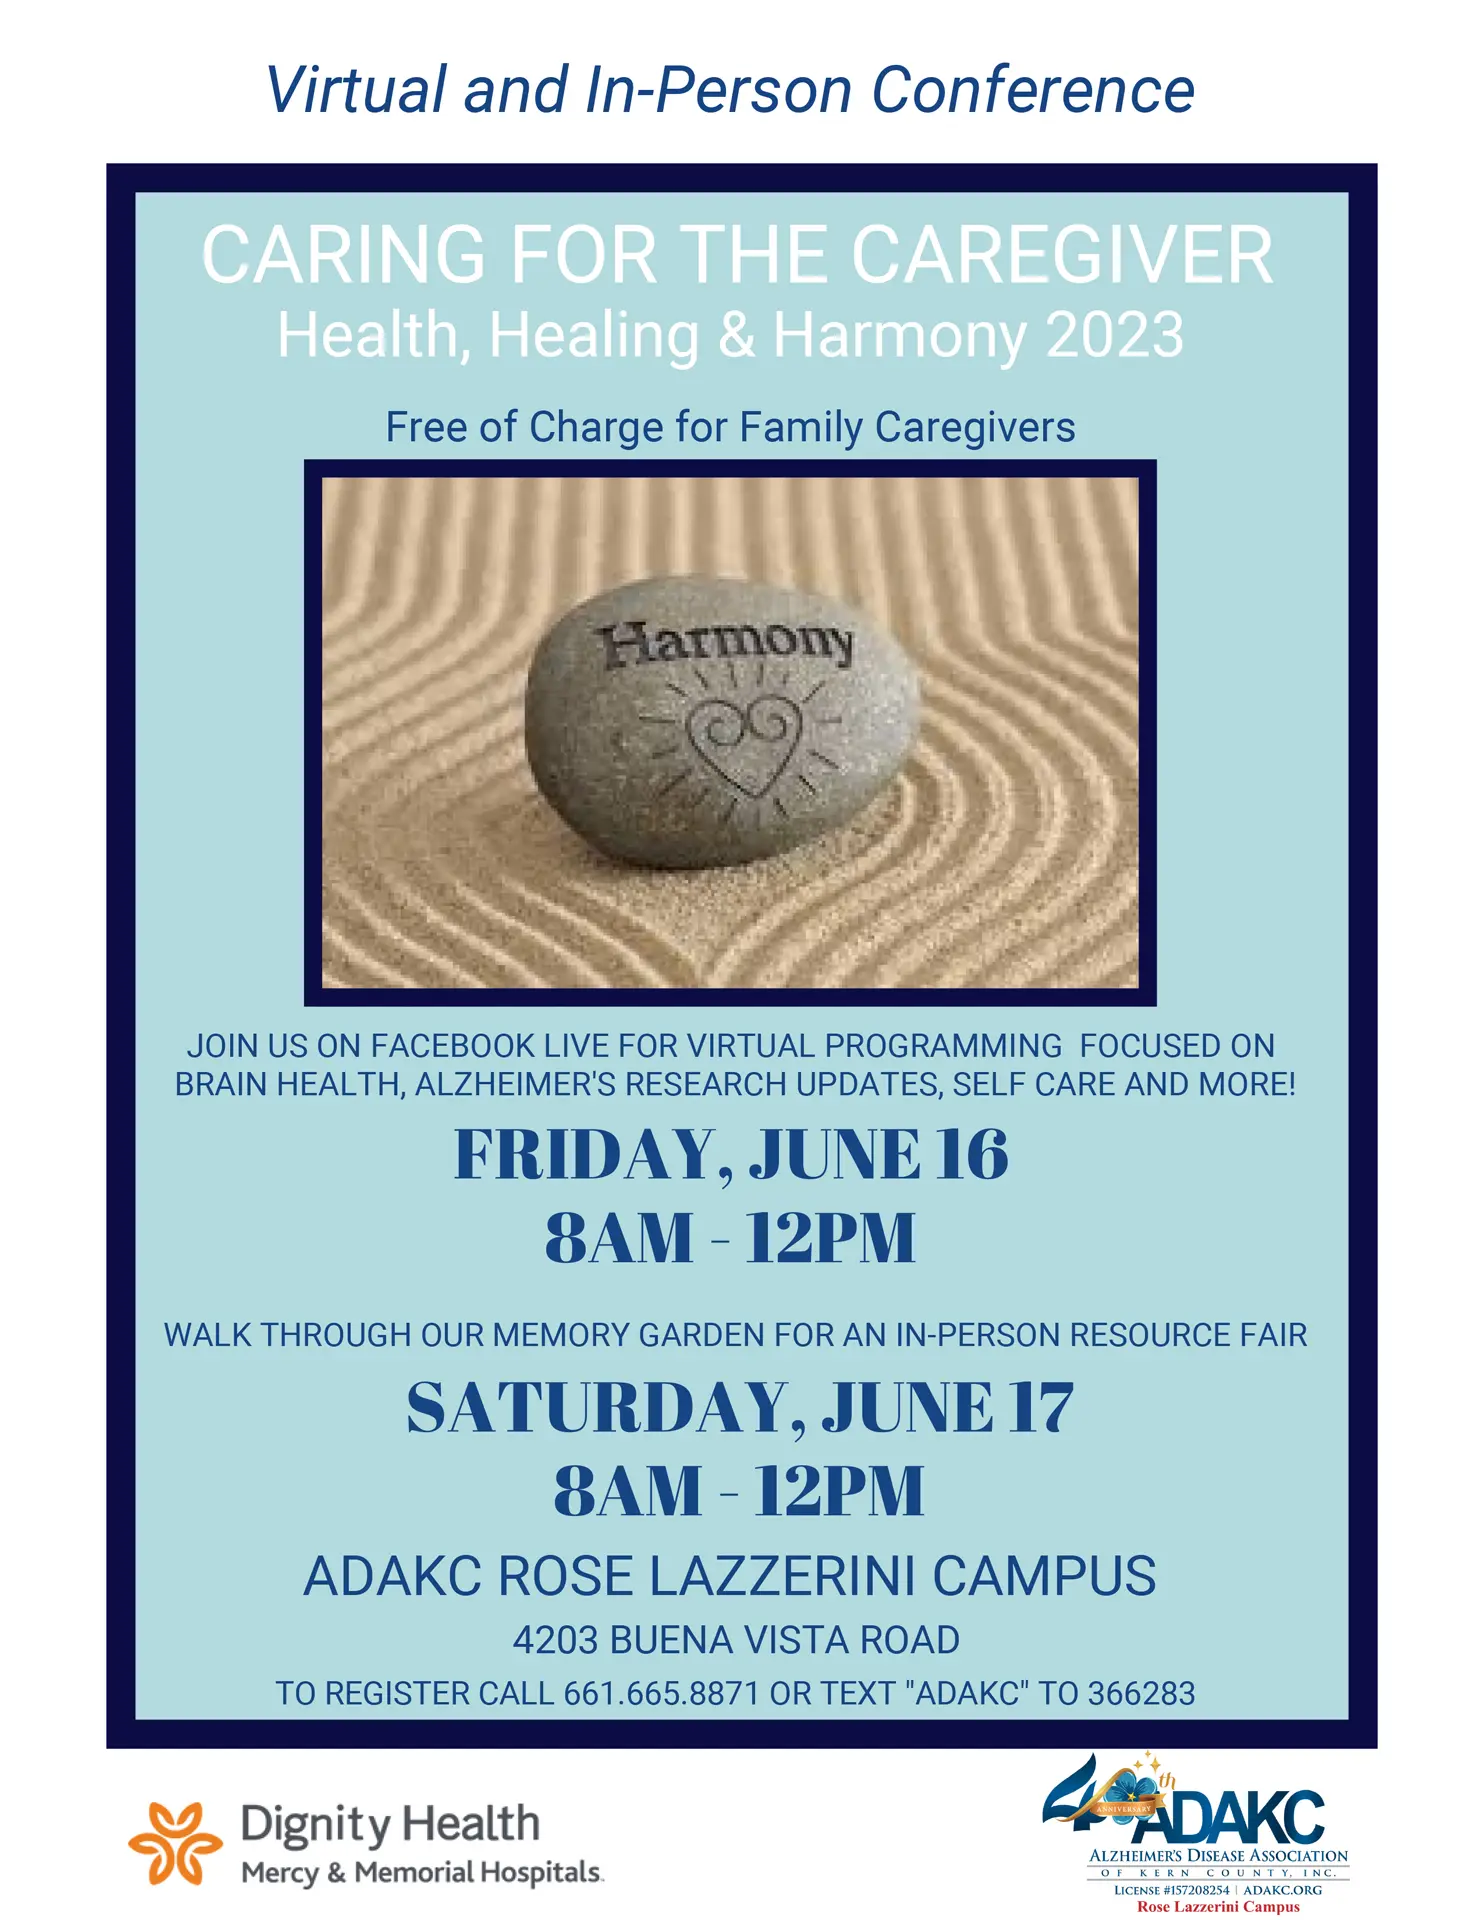 Caring for the Caregiver 2023 flyer